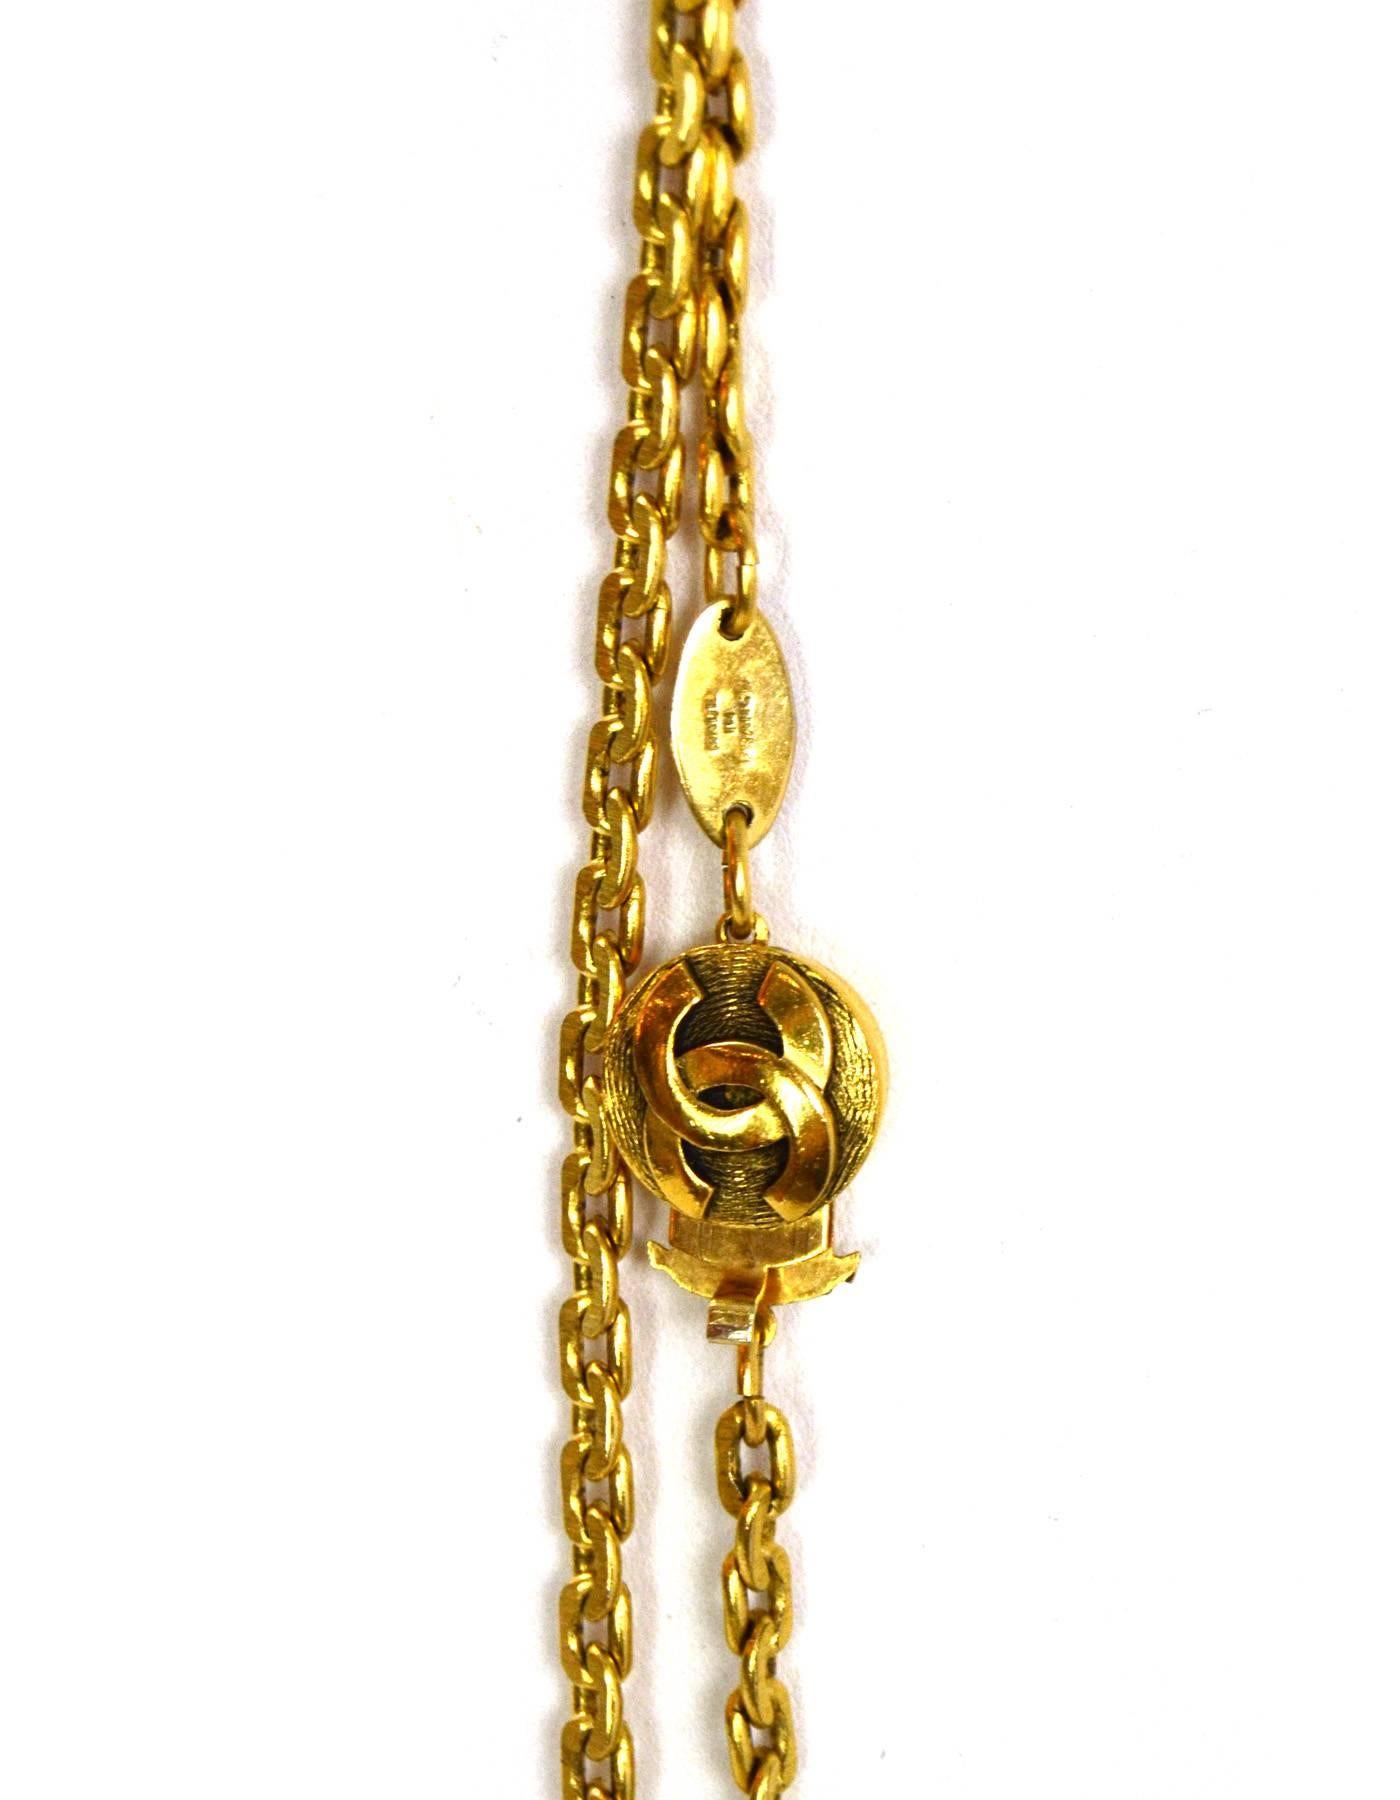 Women's Chanel Vintage Goldtone Necklace with Pave Stones